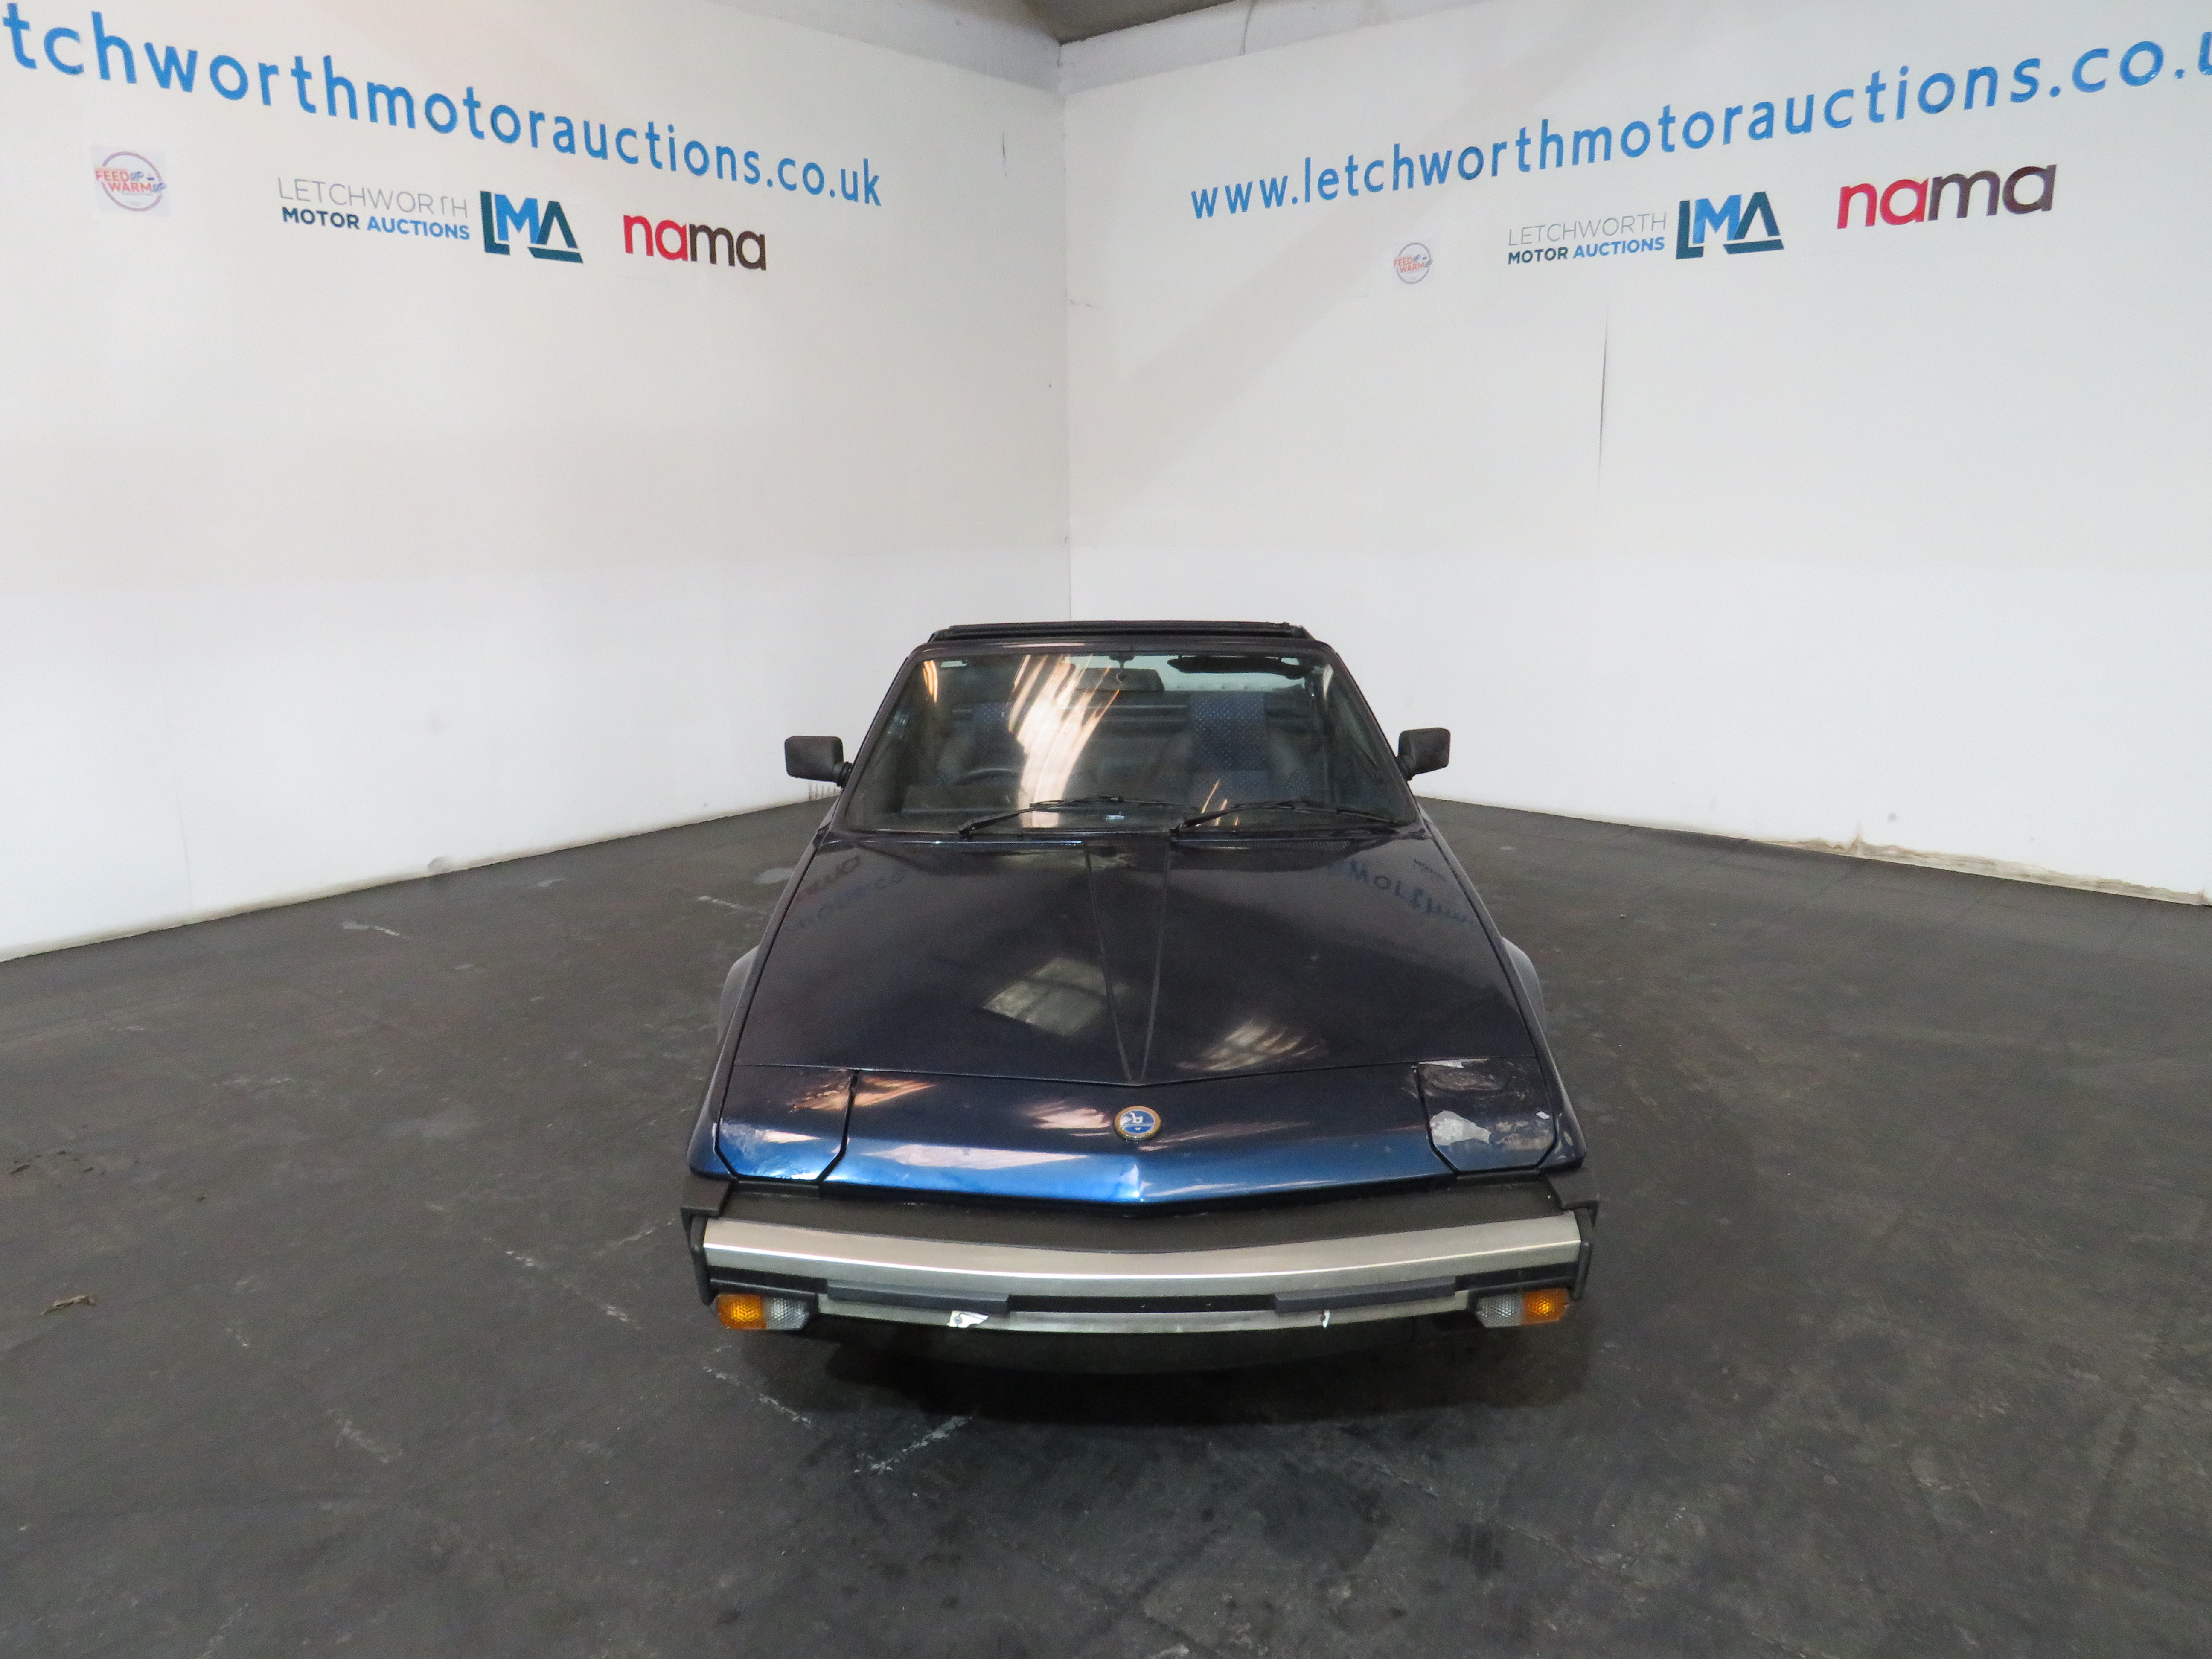 1989 Fiat X1/9 Gran Finale - 1498cc - ONE OWNER FROM NEW - Image 4 of 38